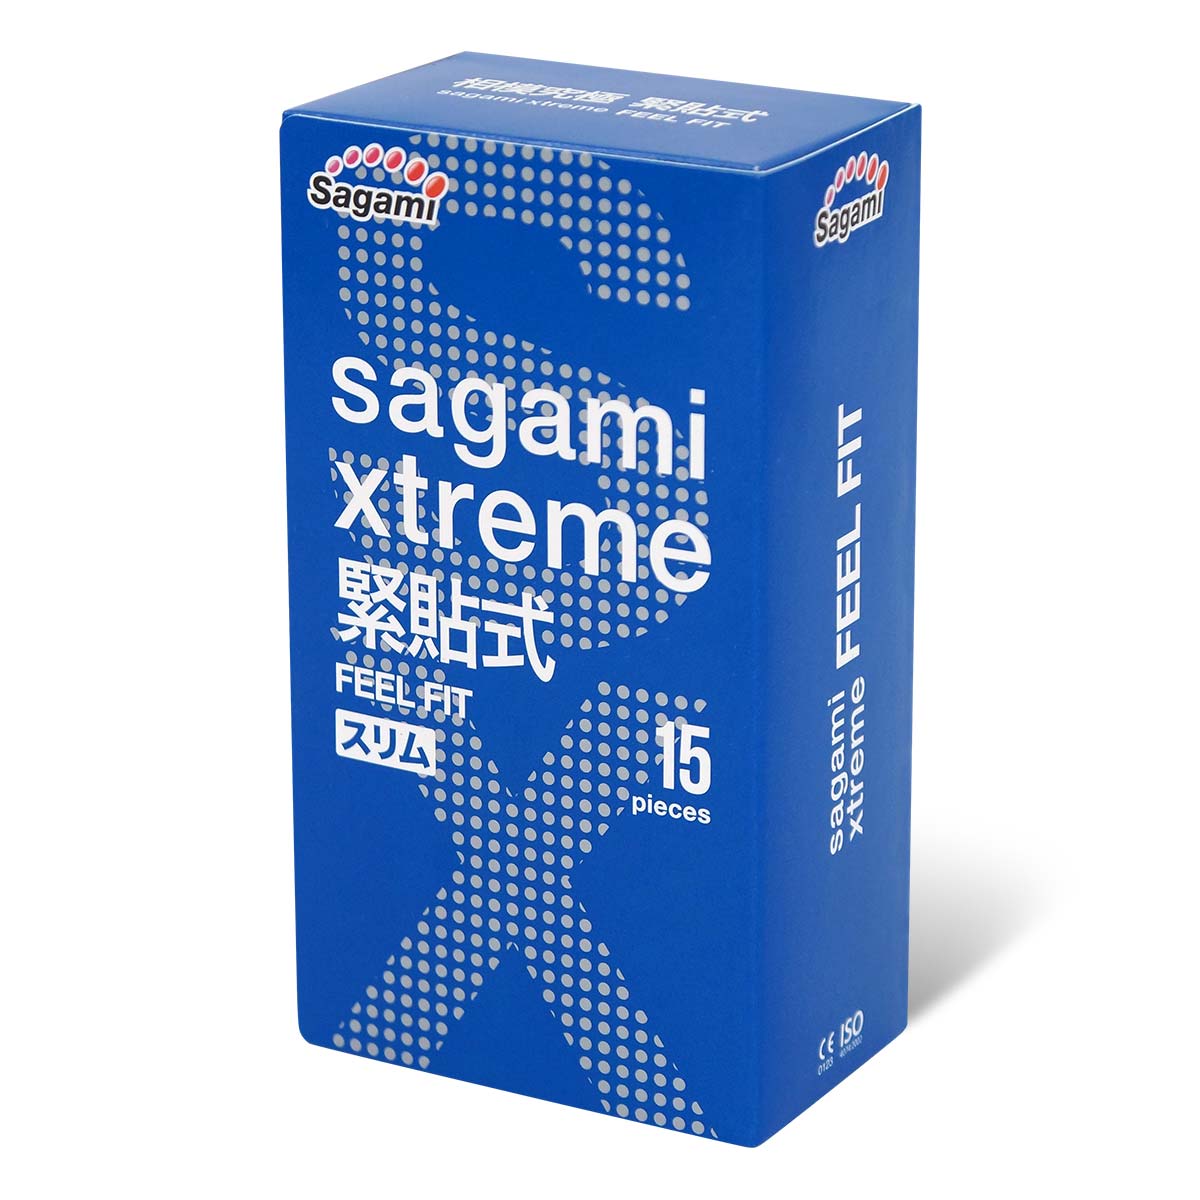 Sagami Xtreme Feel Fit (2nd generation) 51mm 15's Pack Latex Condom-p_1